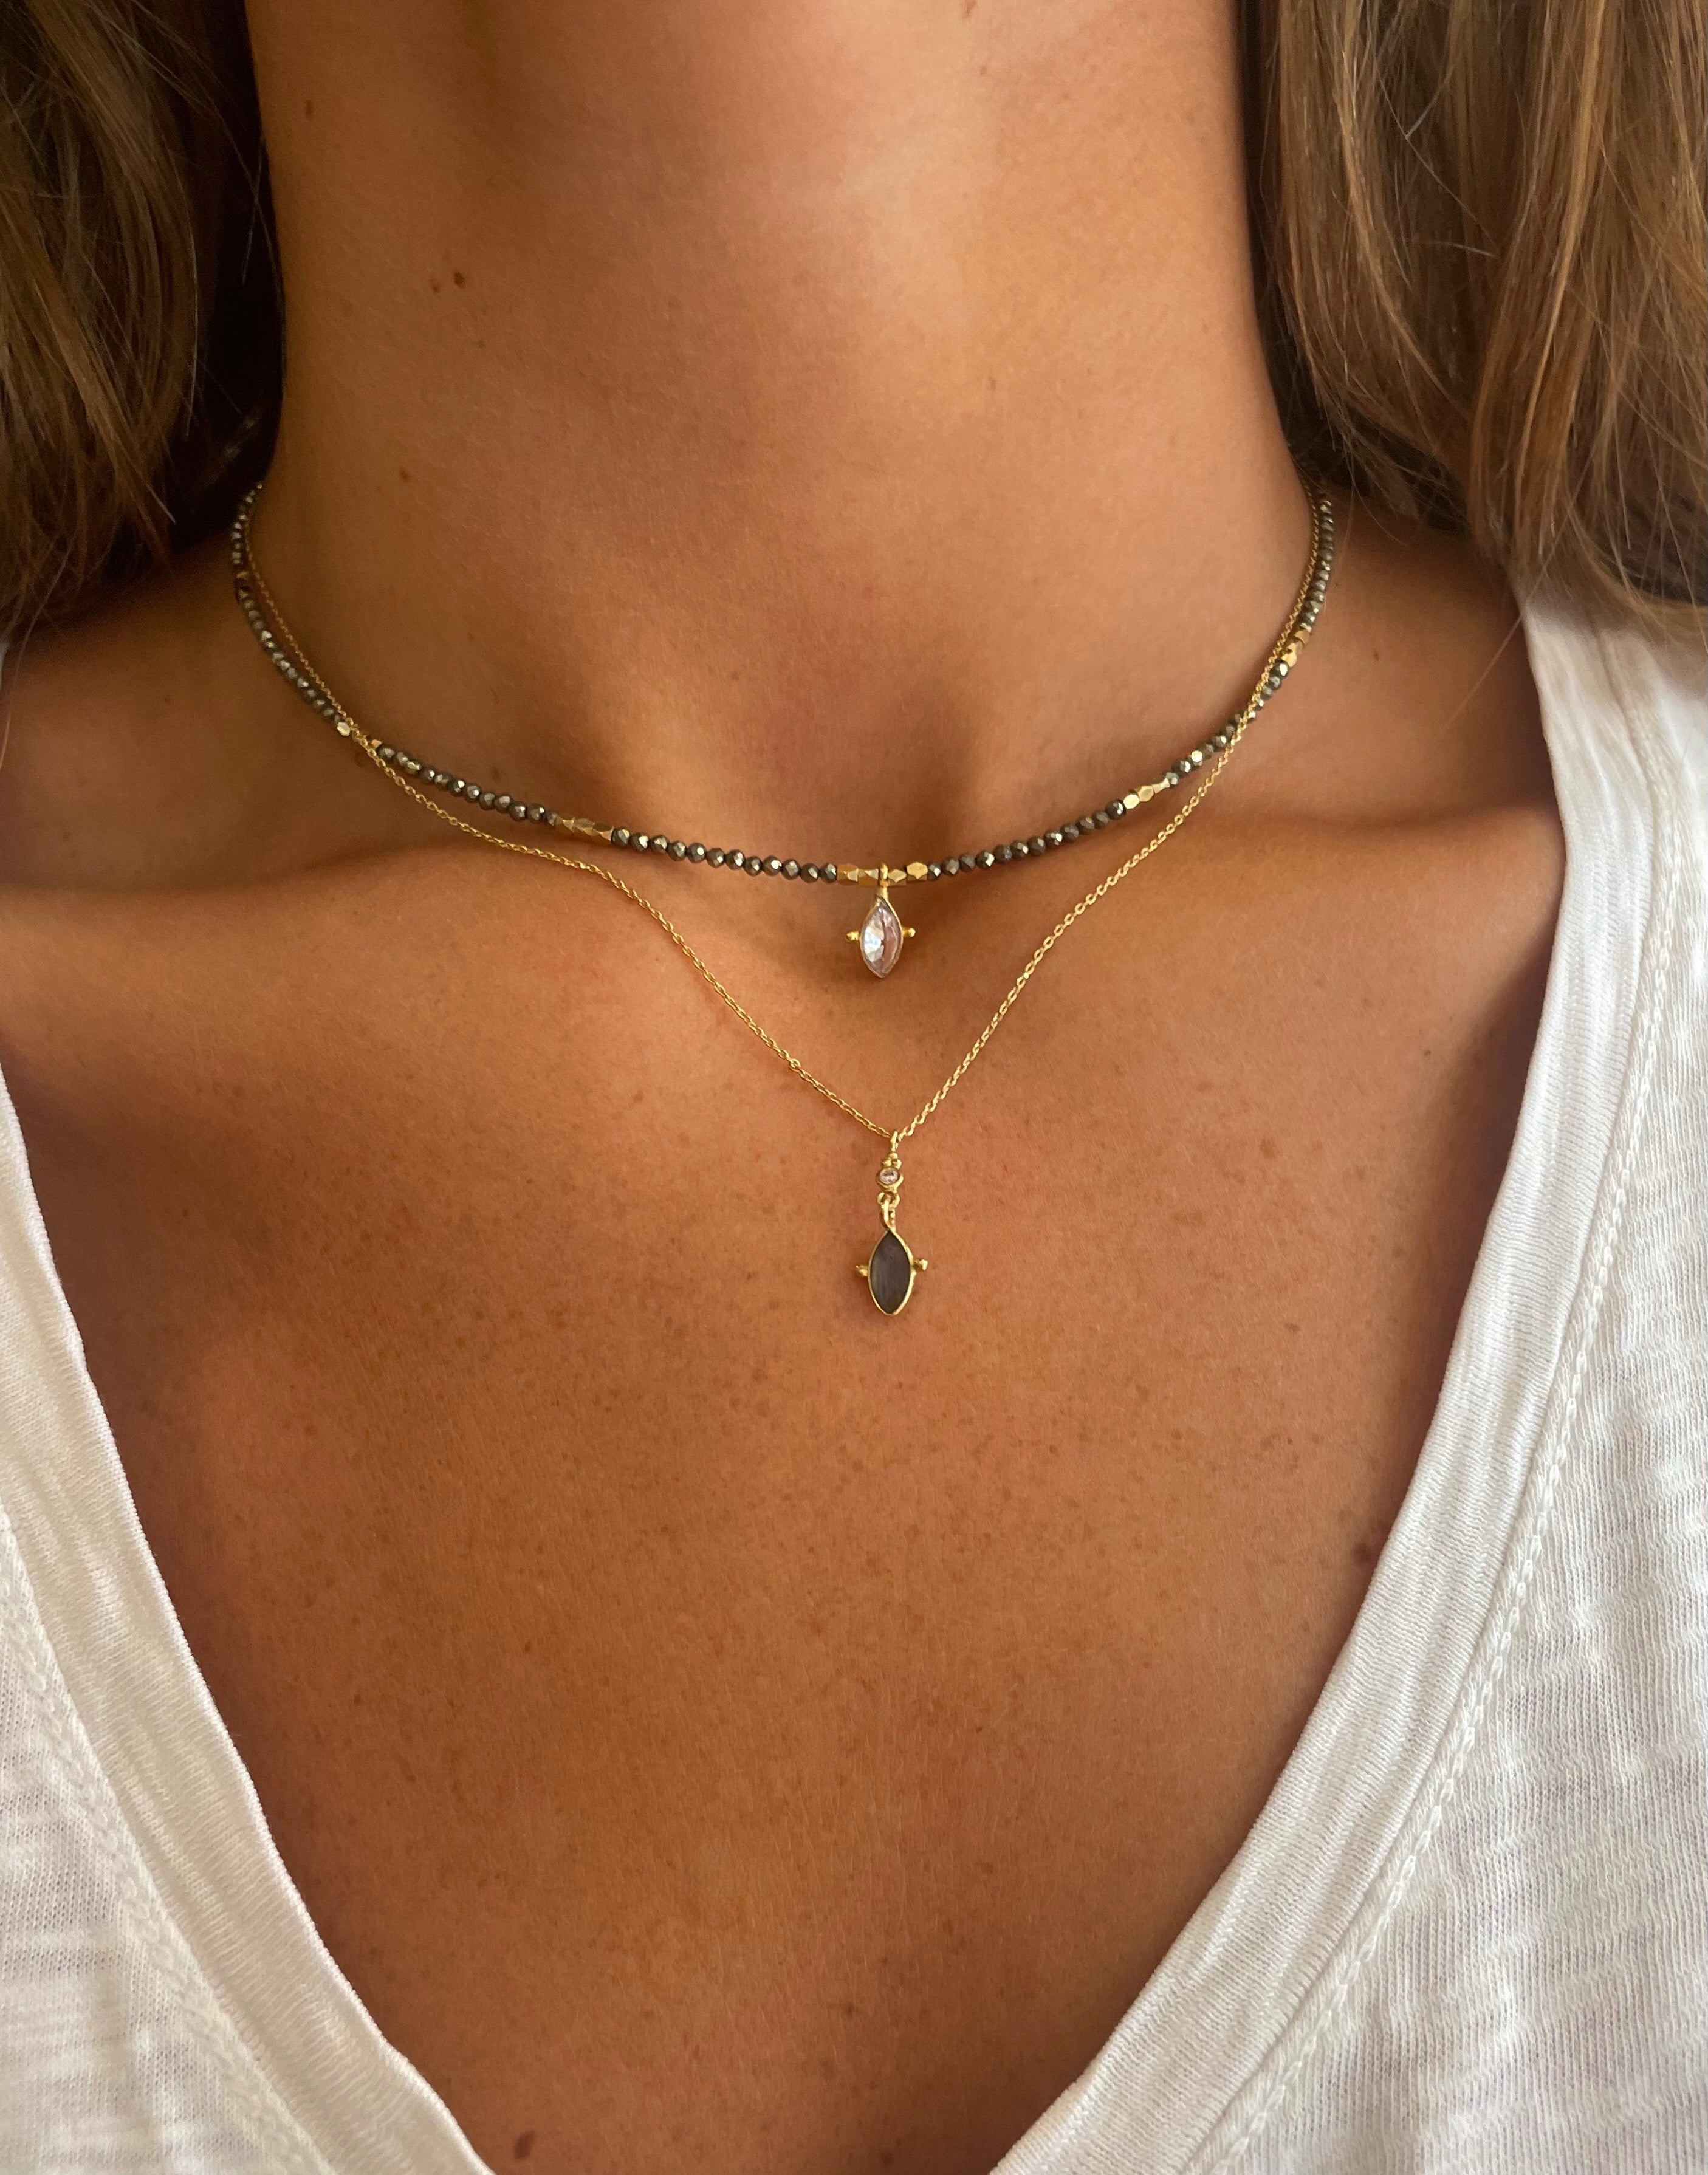 gigi necklaces pyrite and labradorite choker necklace by hanka in layering necklaces